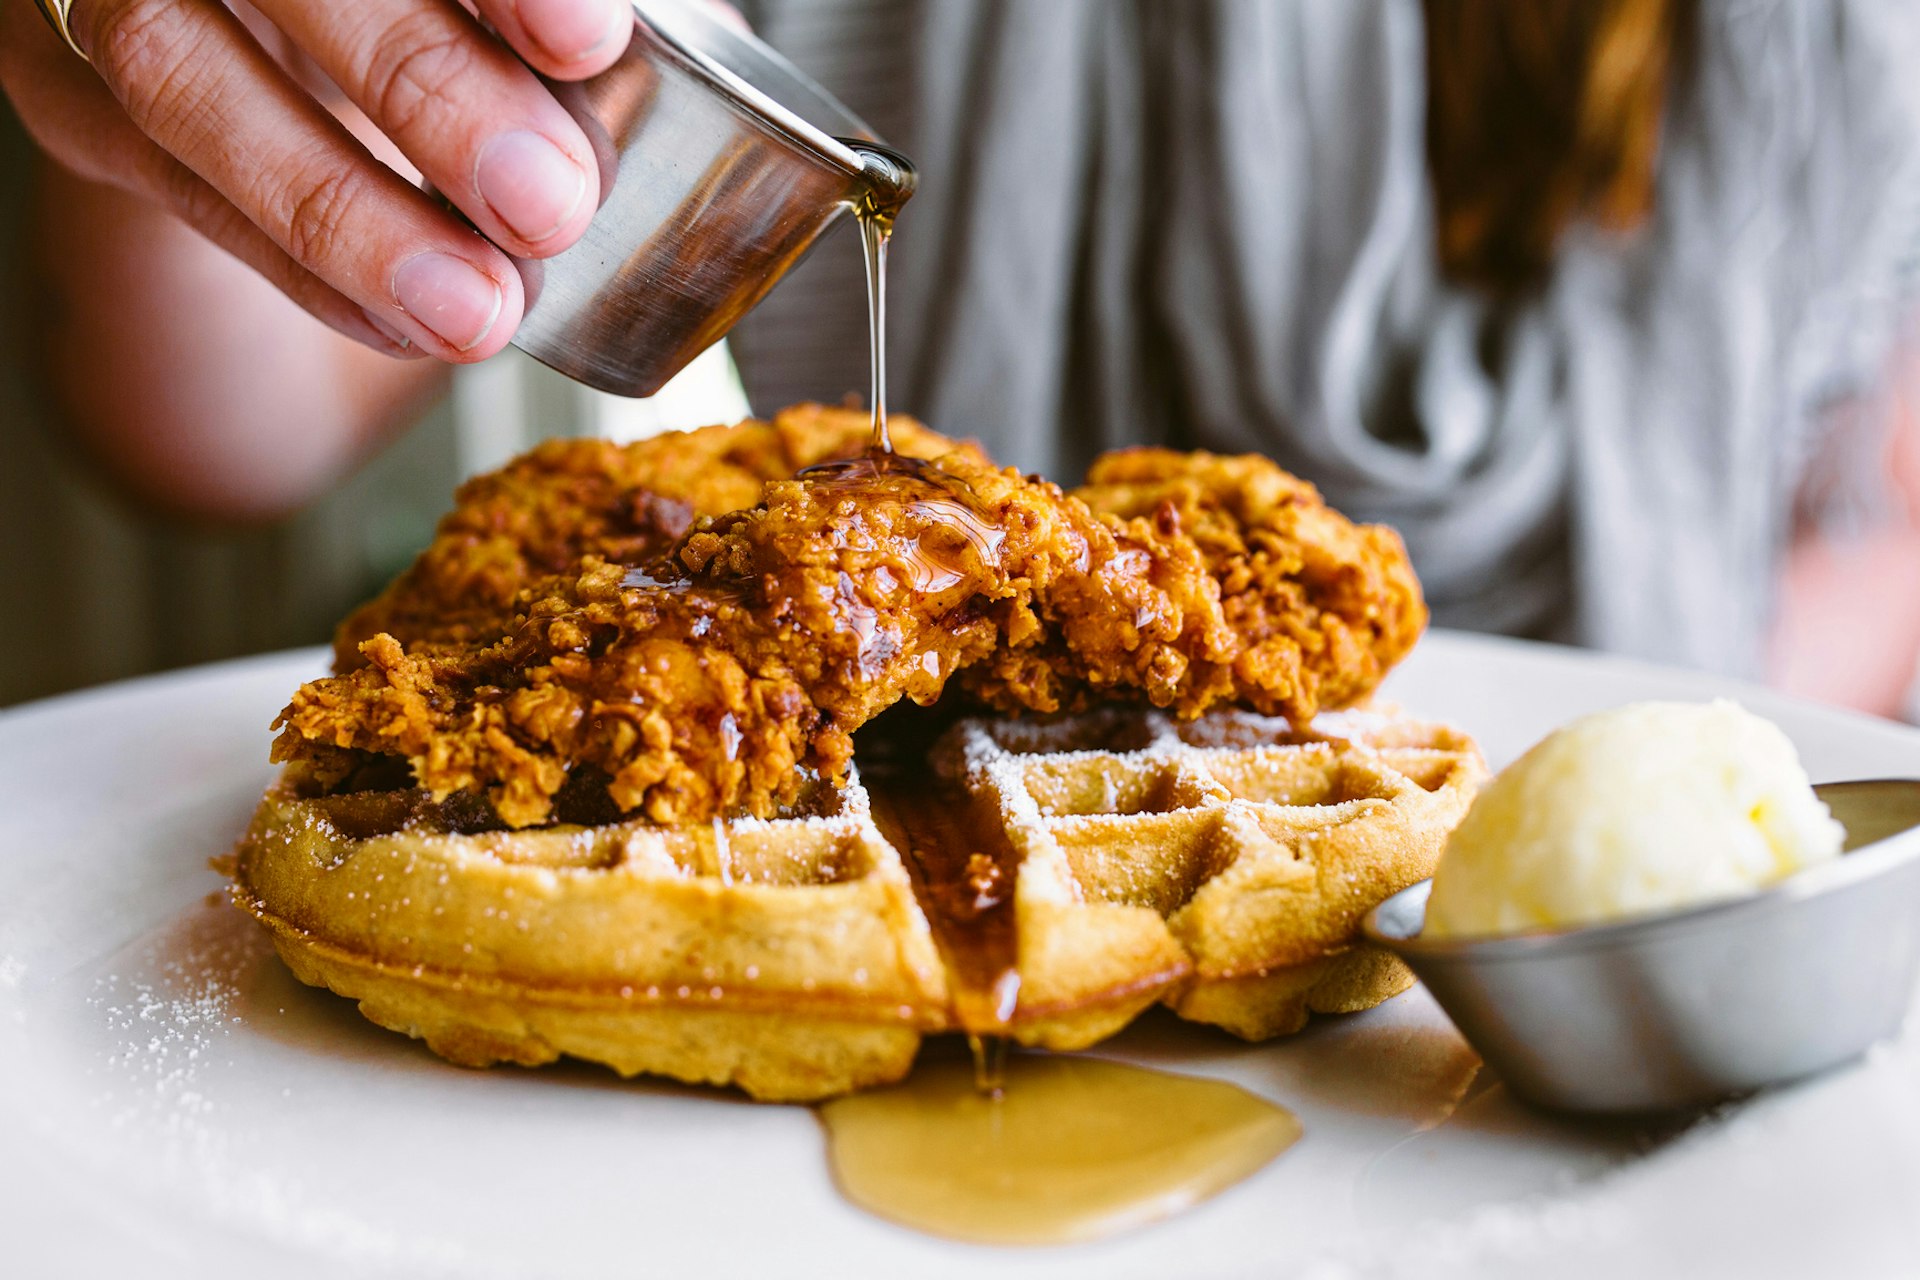 Syrup being poured over chicken and waffles in Atlanta.